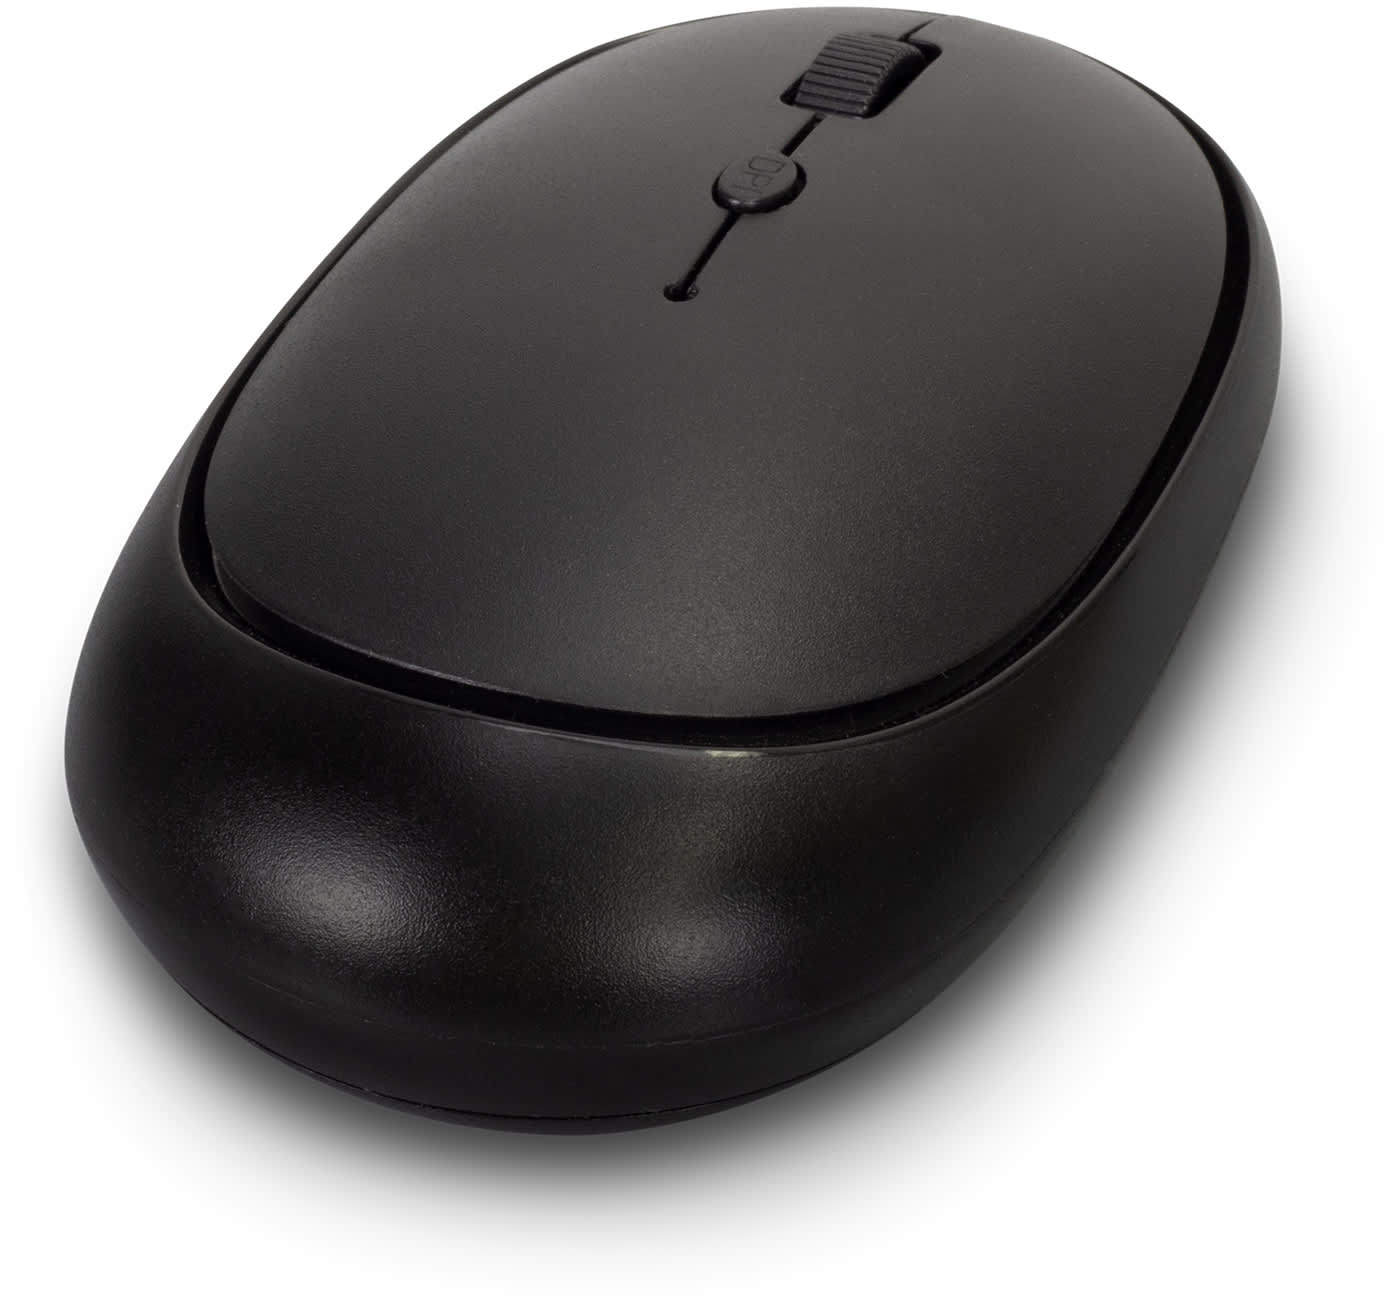 Astra Wireless Travel Mouse